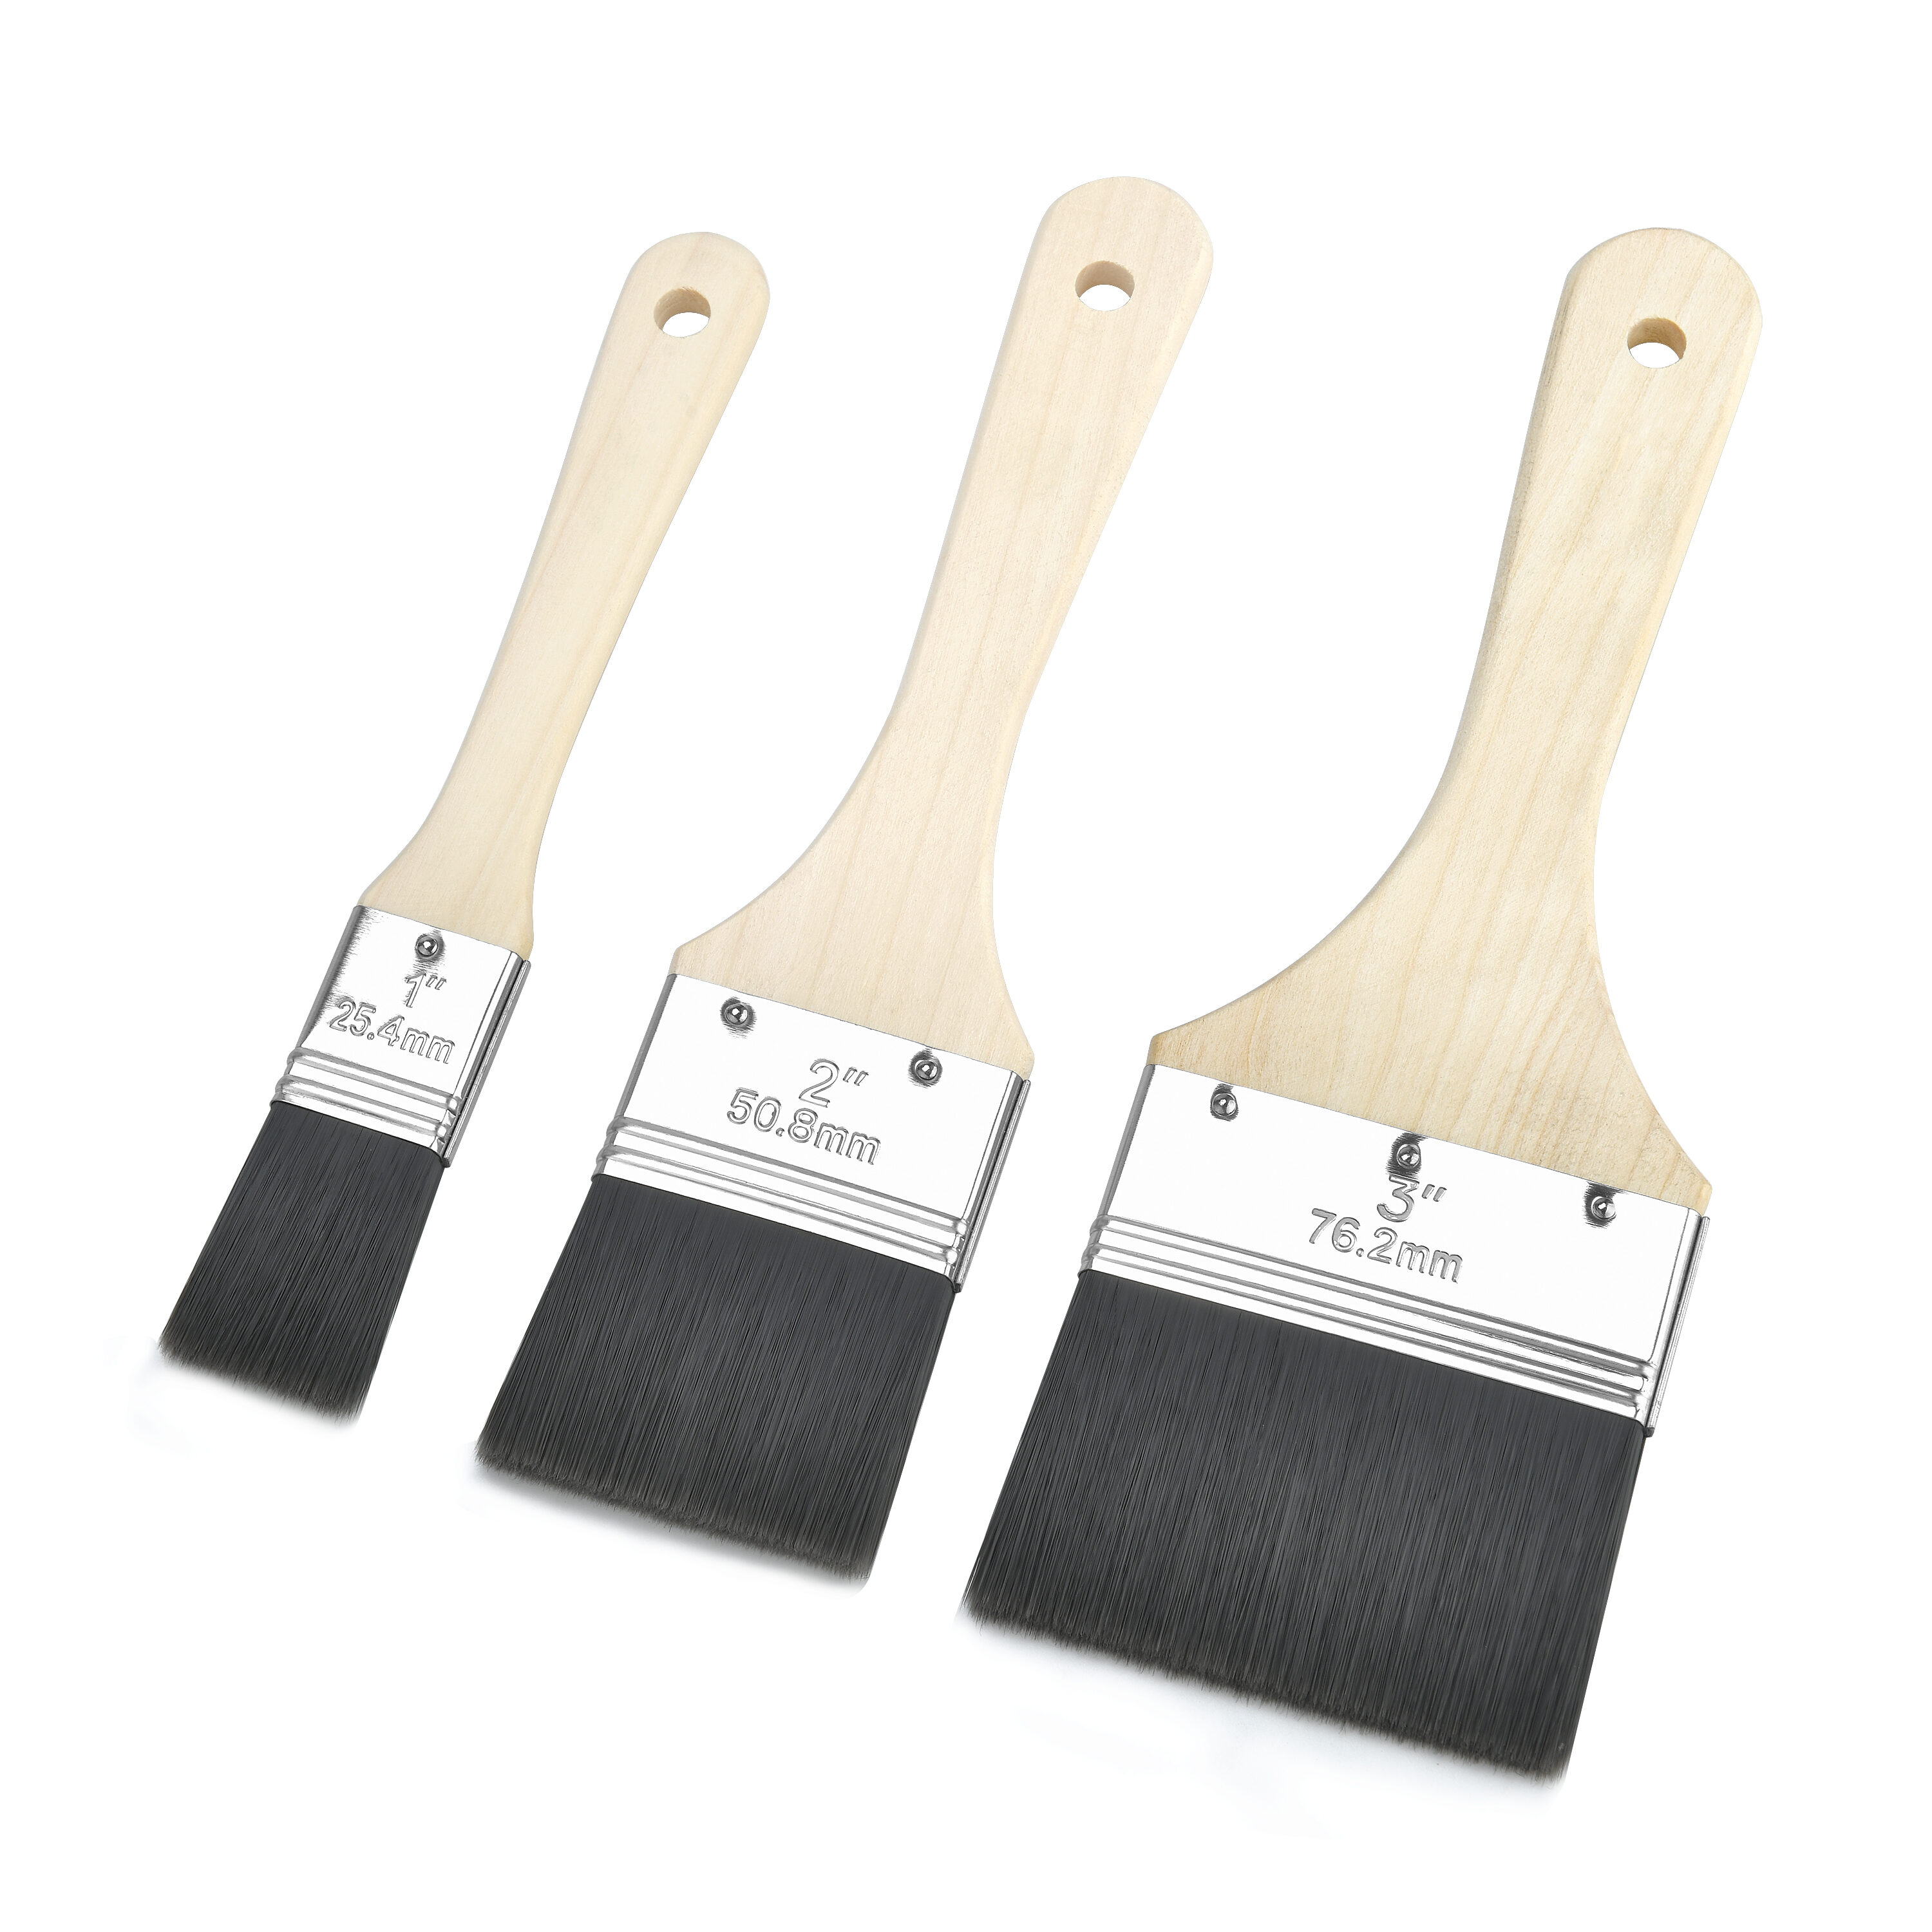 Project Source 4-in Natural Bristle Flat Paint Brush (Chip Brush) in the  Paint Brushes department at